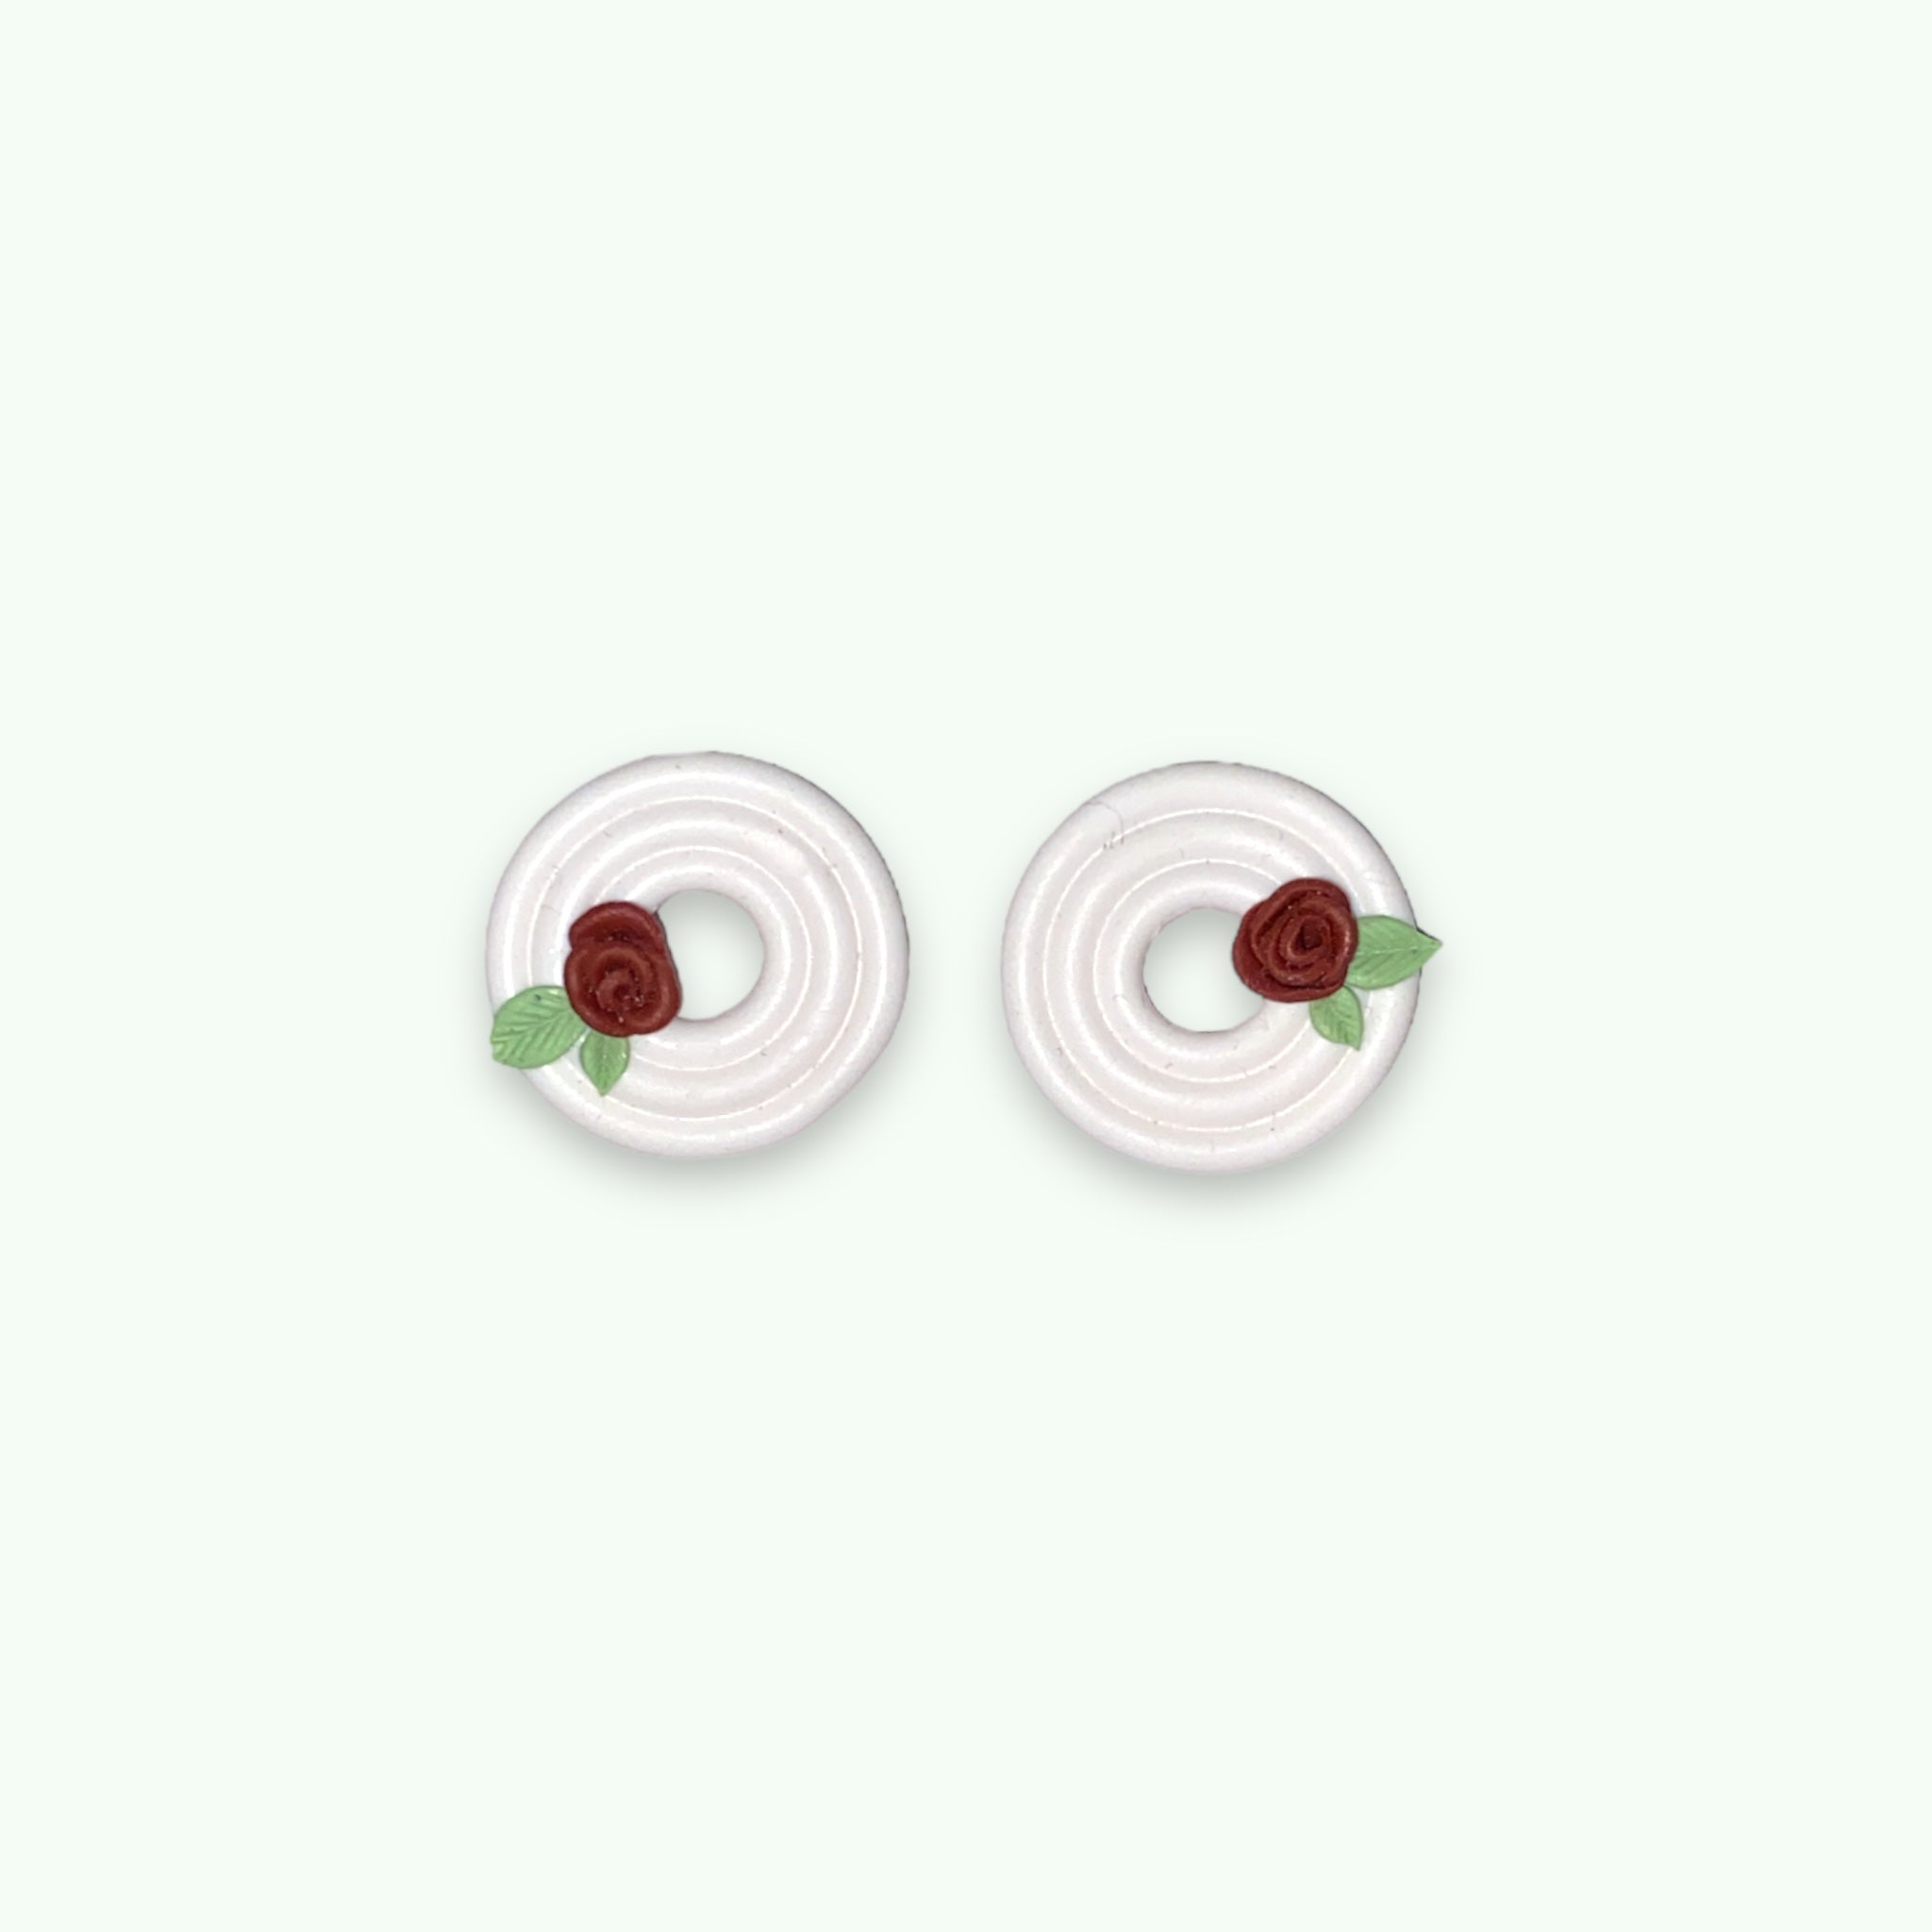 White With rose - studs Handmade Hygge